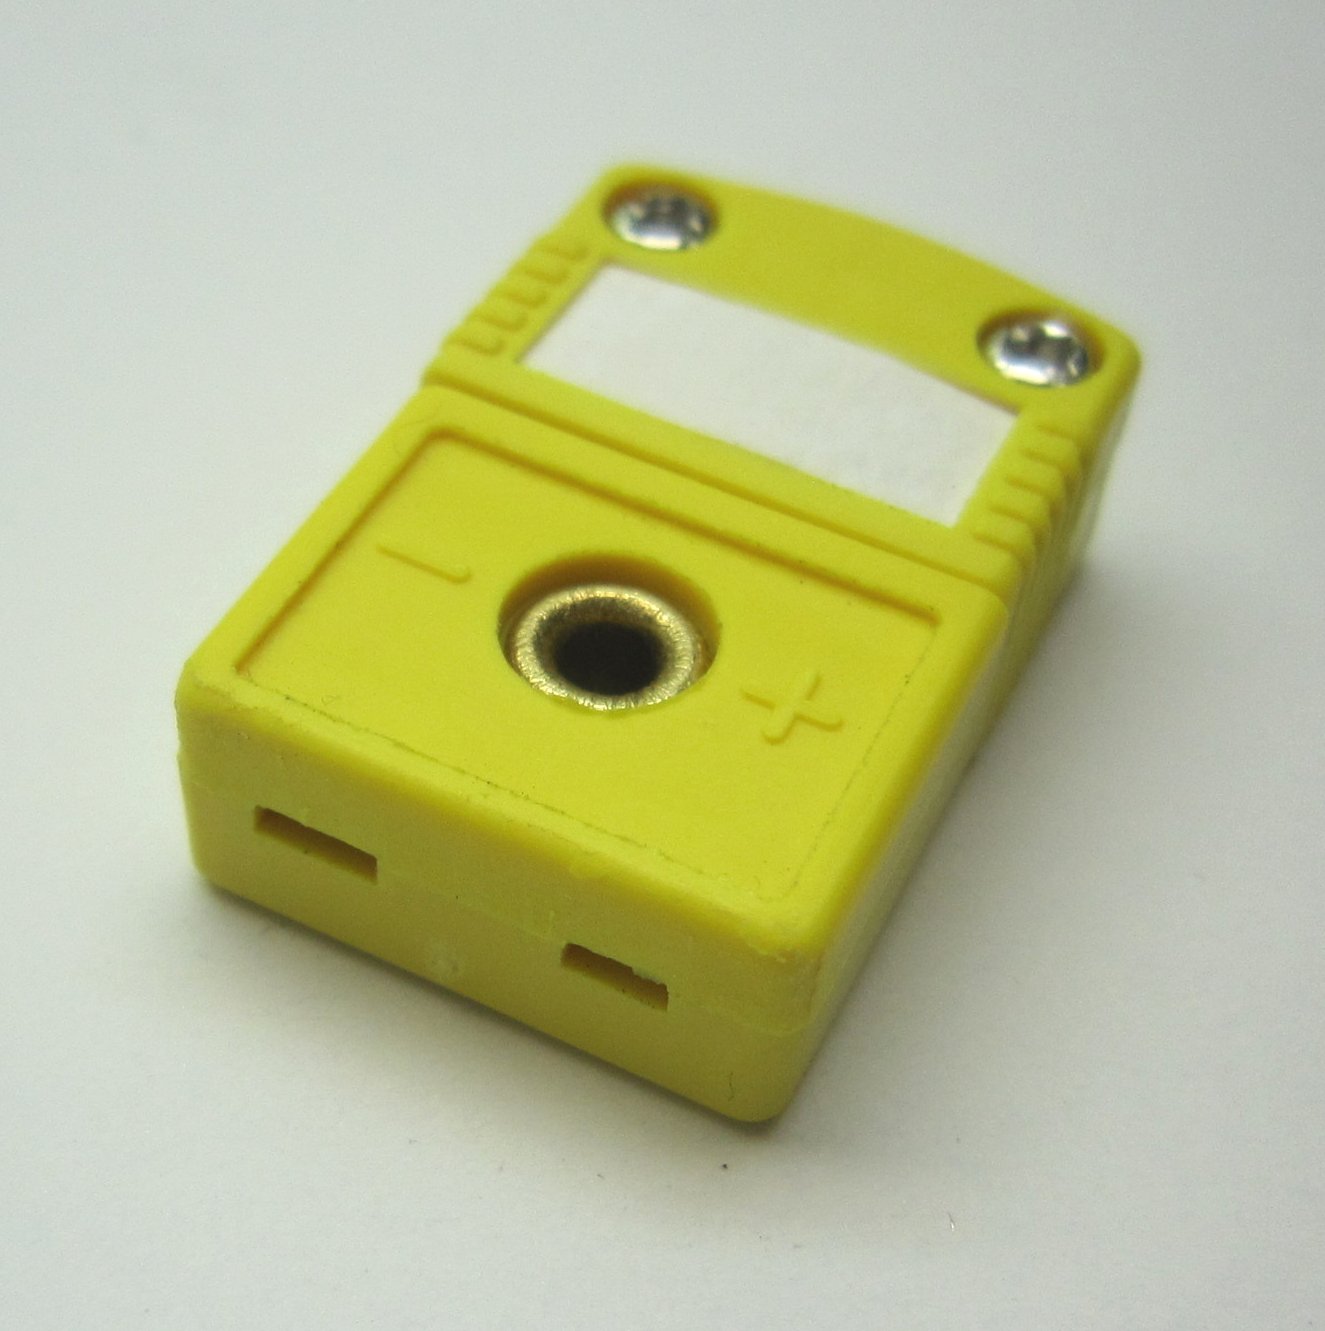 Type K Thermocouple miniature female connector